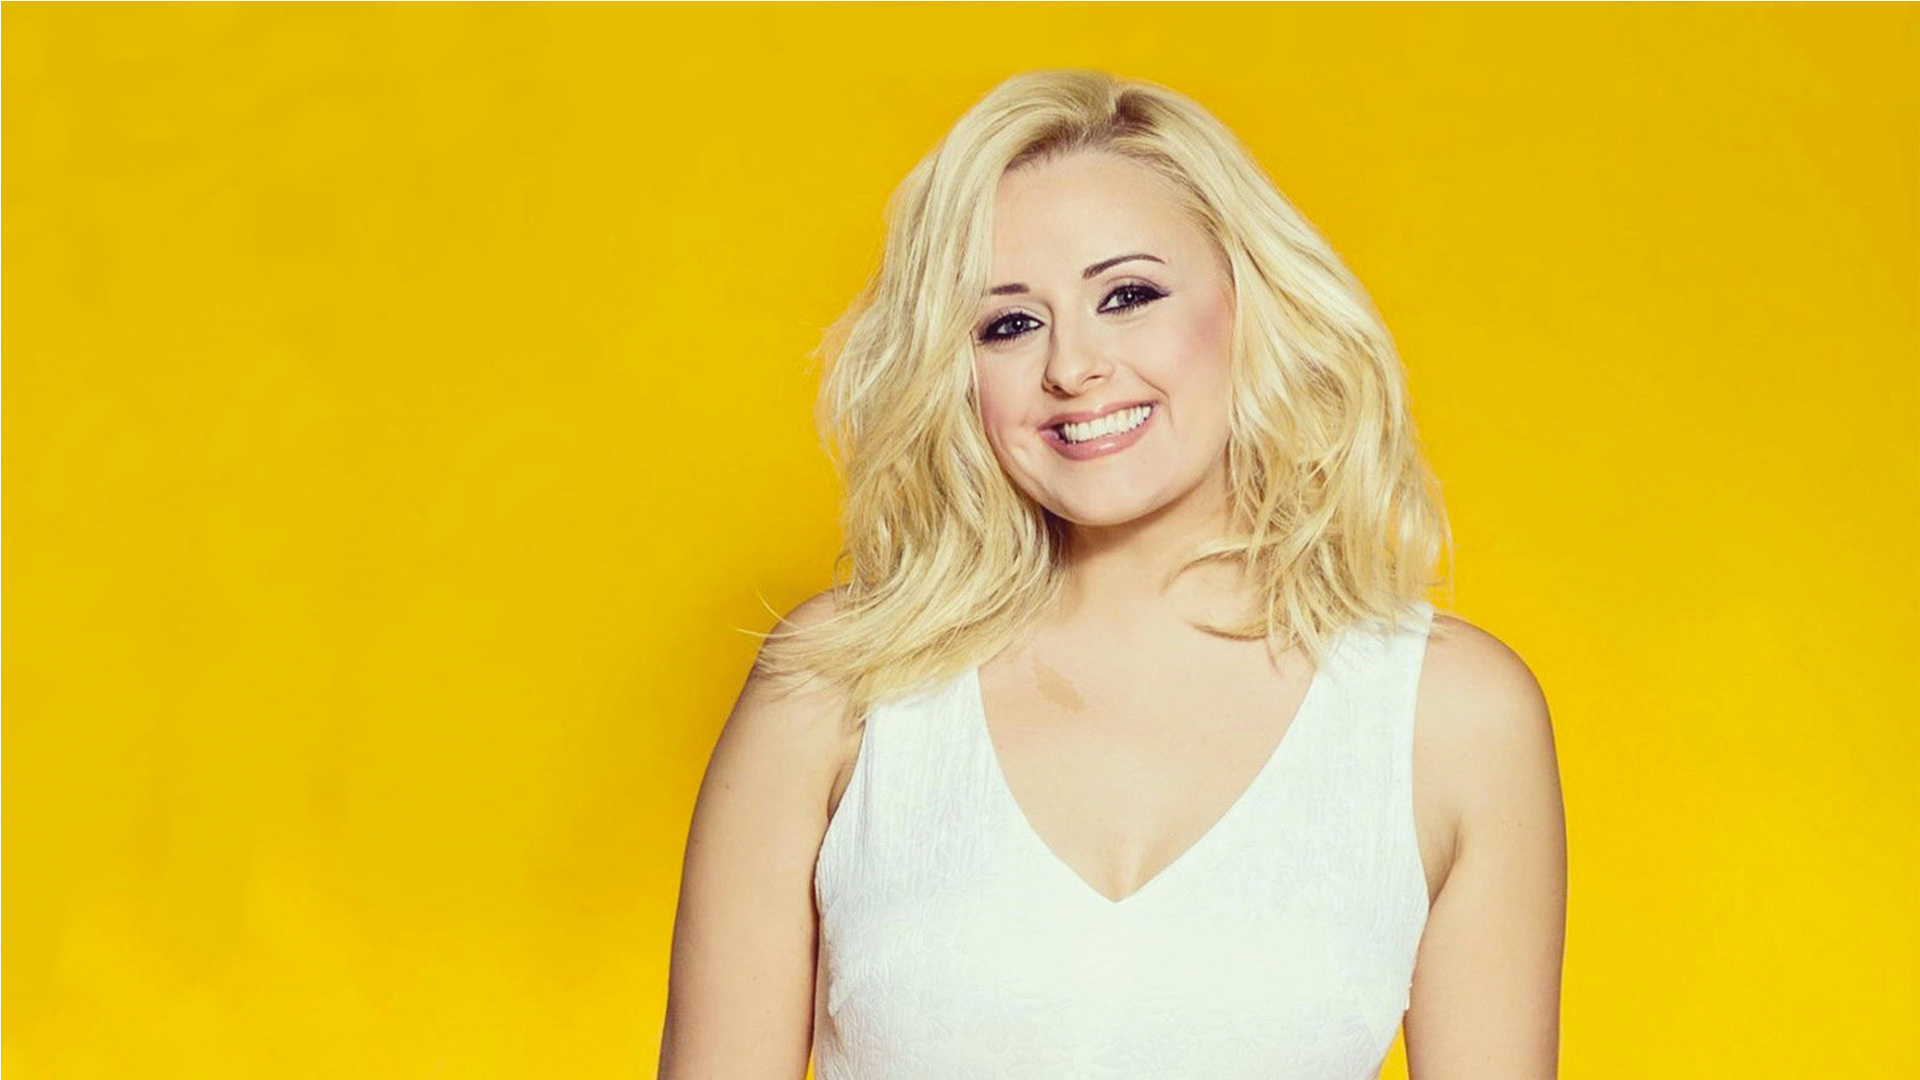 Katie Thistleton smiling and wearing a cream dress against a yellow background.